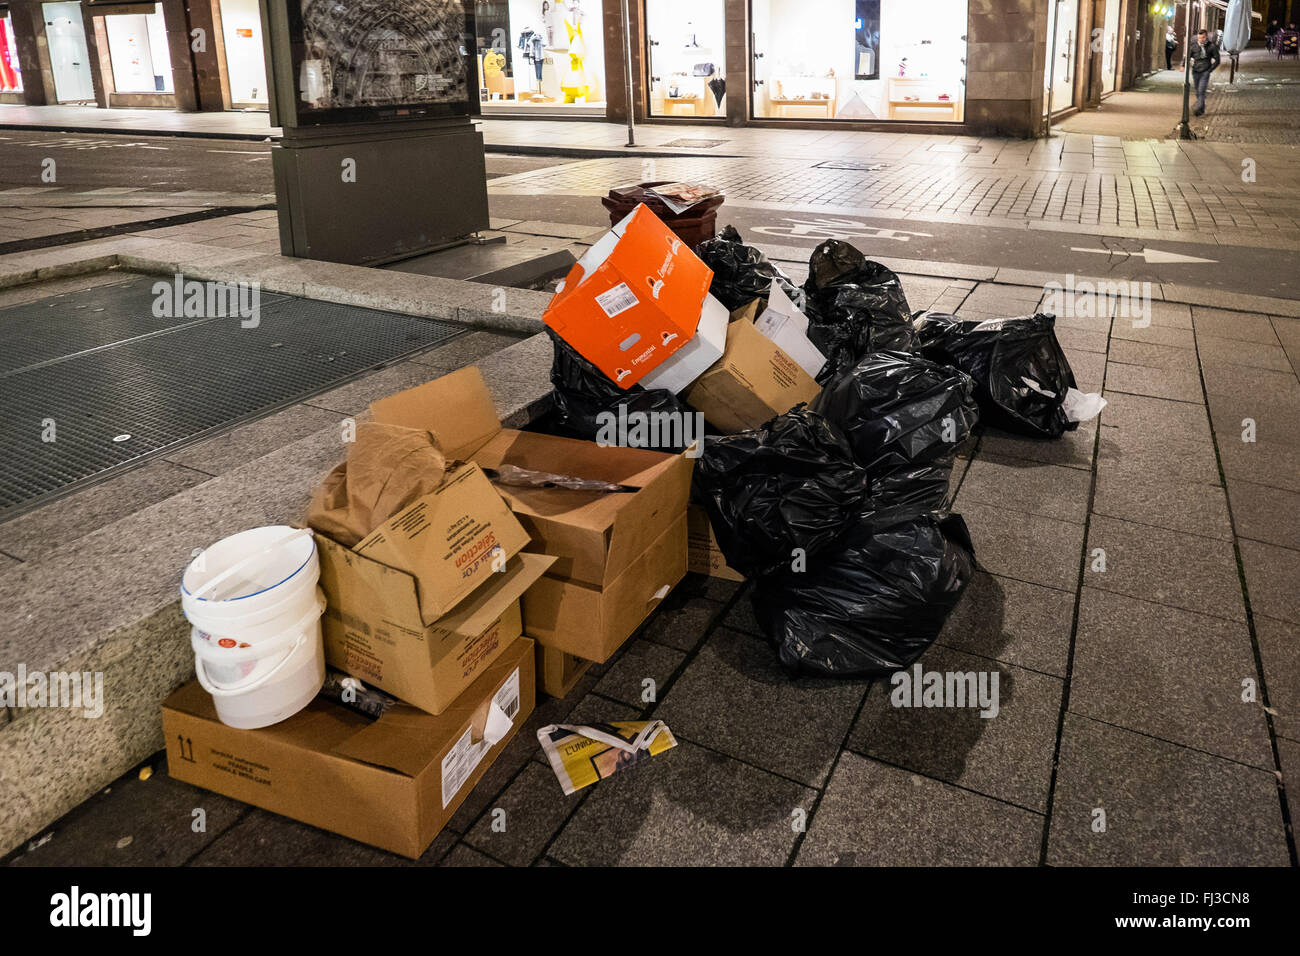 Rubbish awaiting collection on pavement at night, Strasbourg, Alsace, France Europe Stock Photo